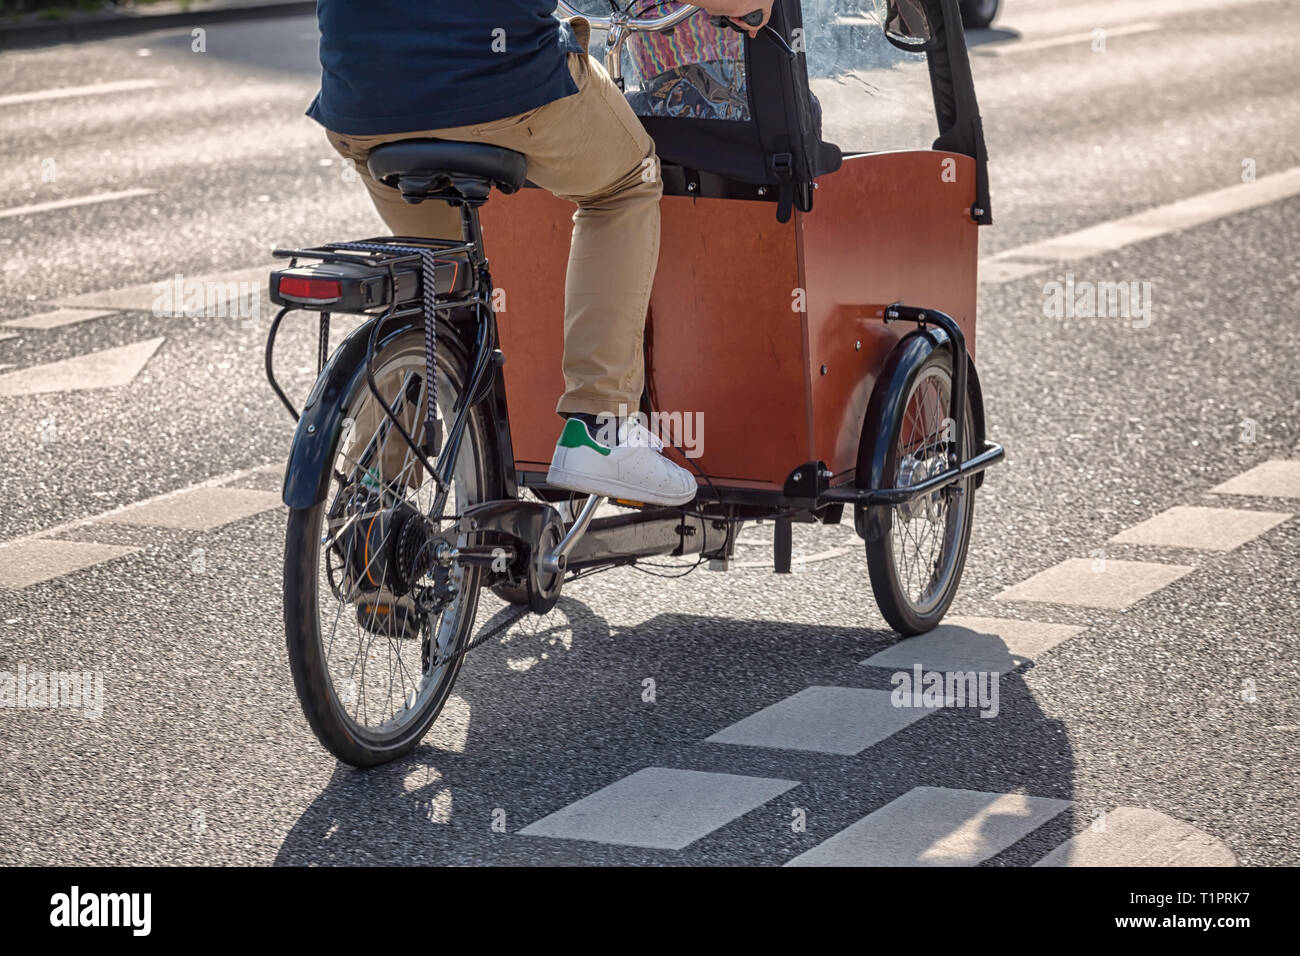 Cargo Bike Child High Resolution Stock Photography and Images - Alamy